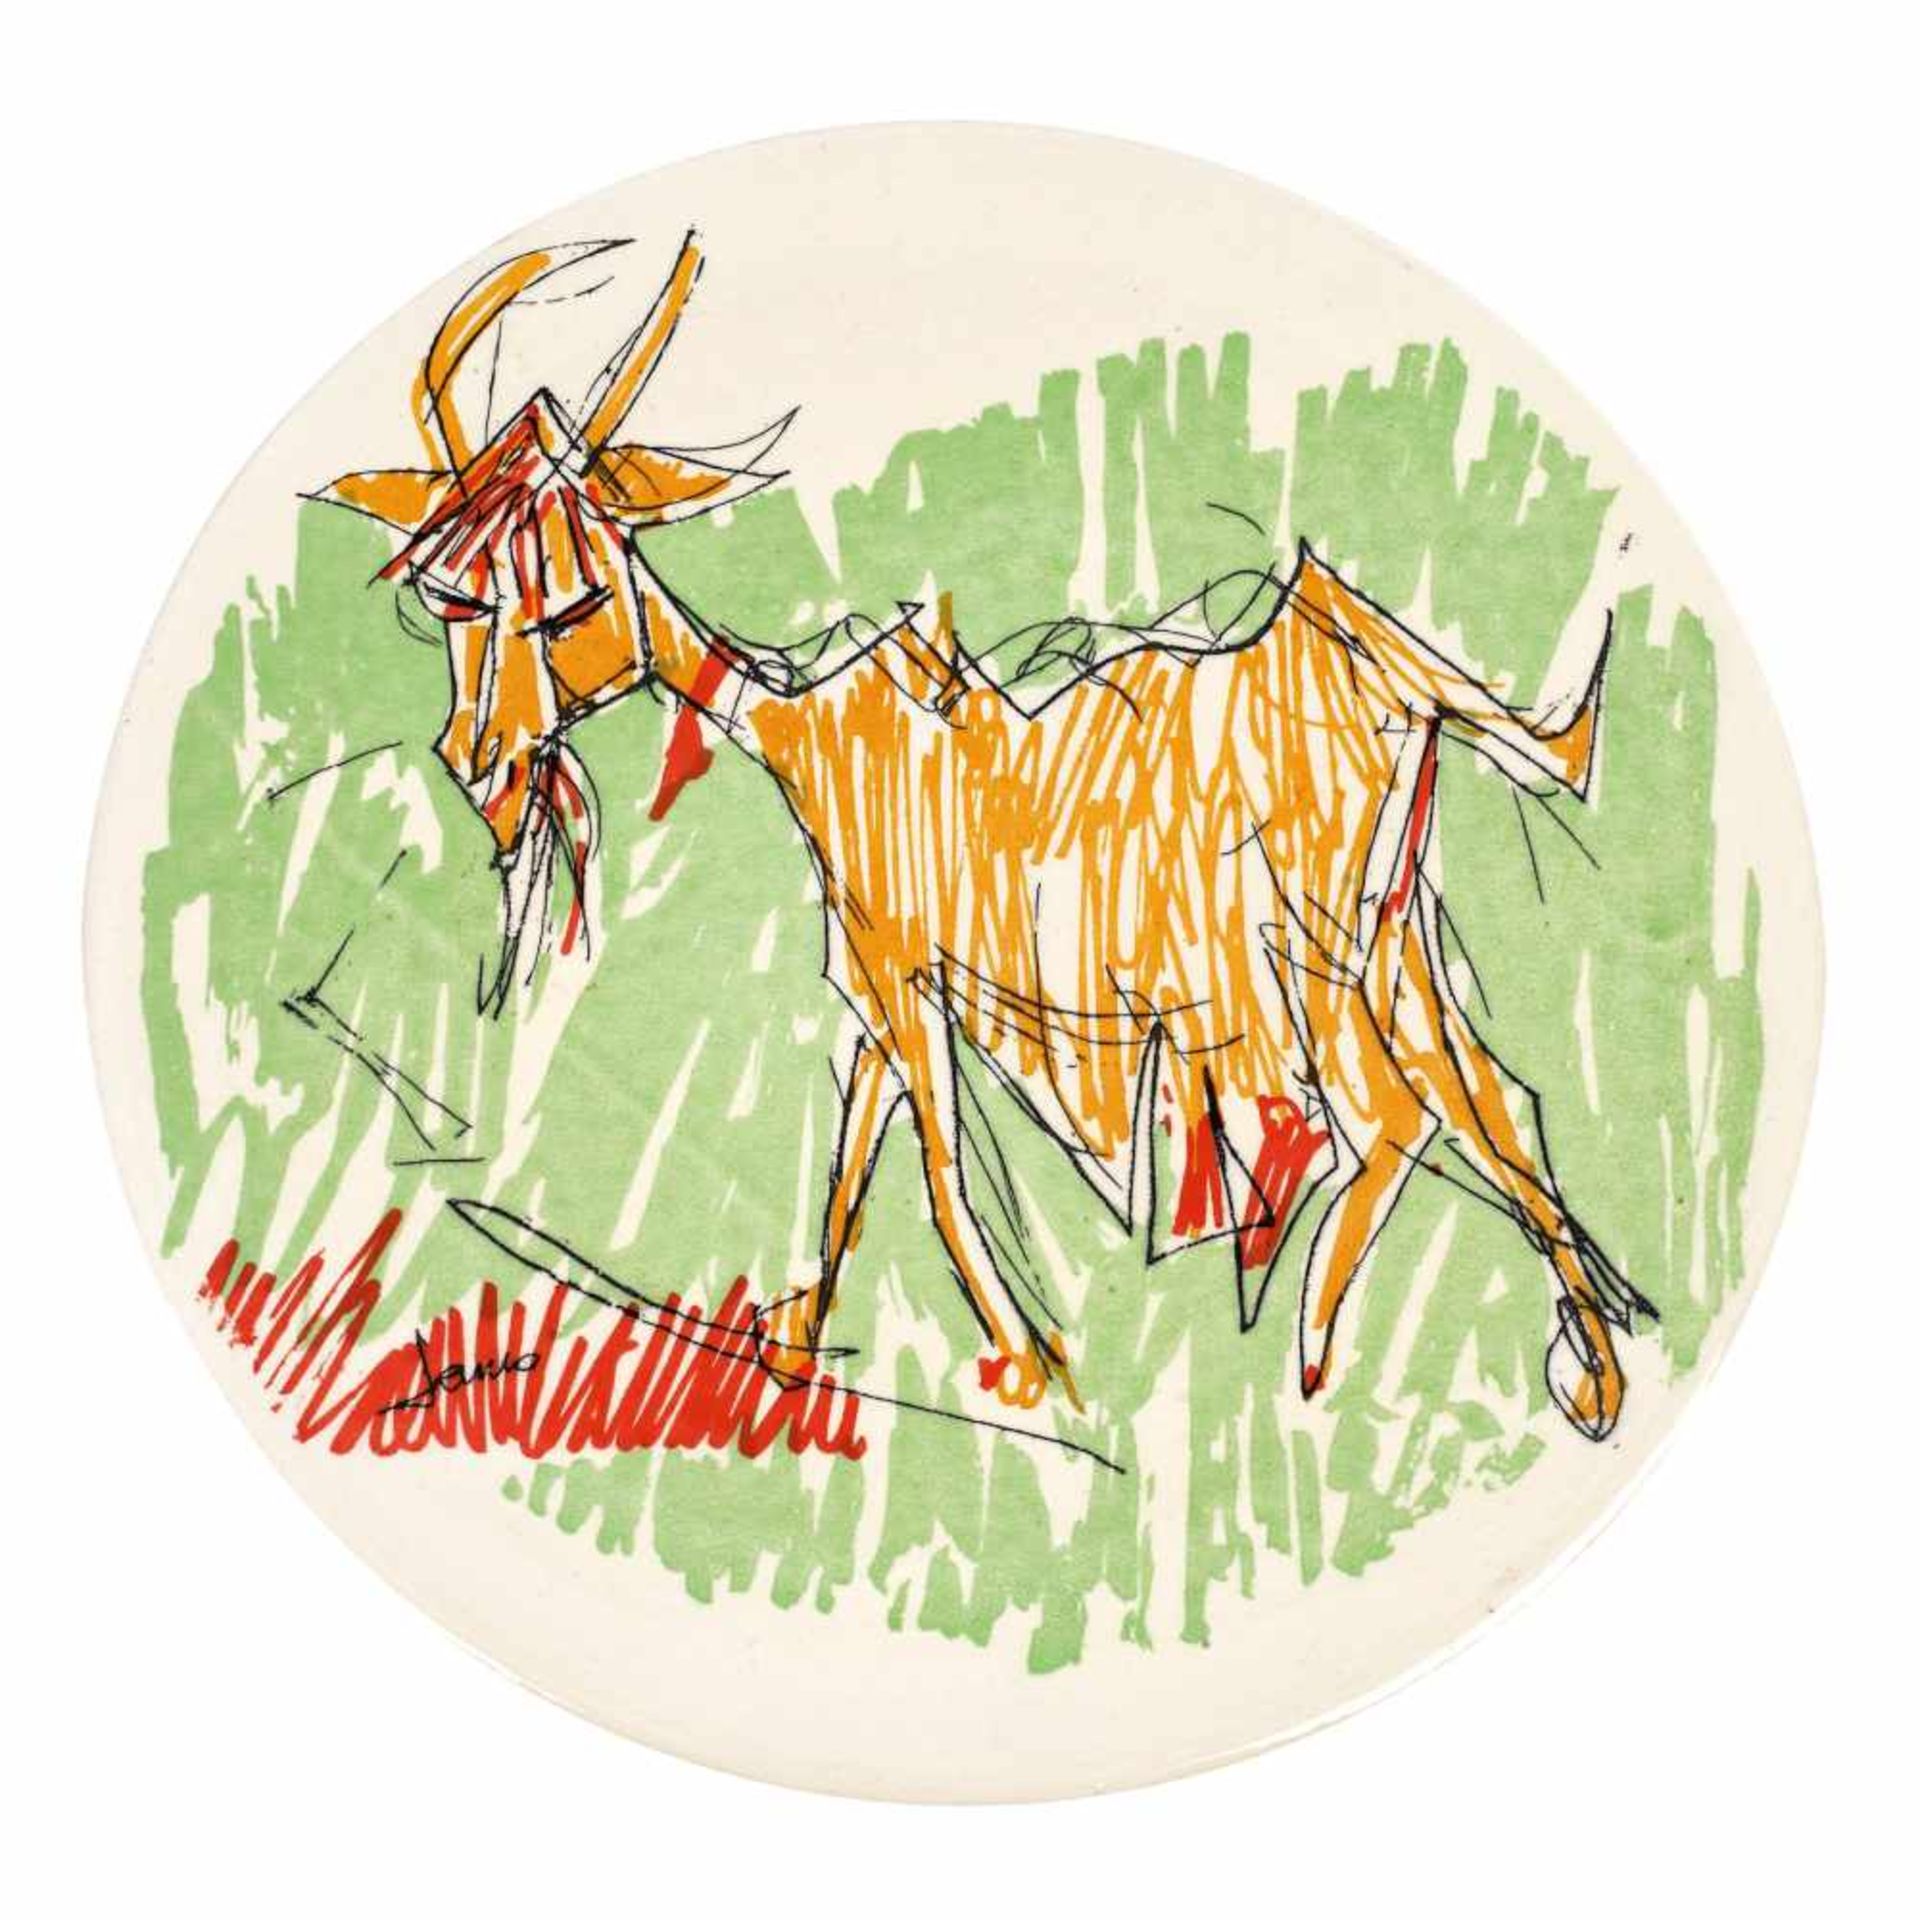 "The Goat" - decorative plate with Marcel Iancu's artwork